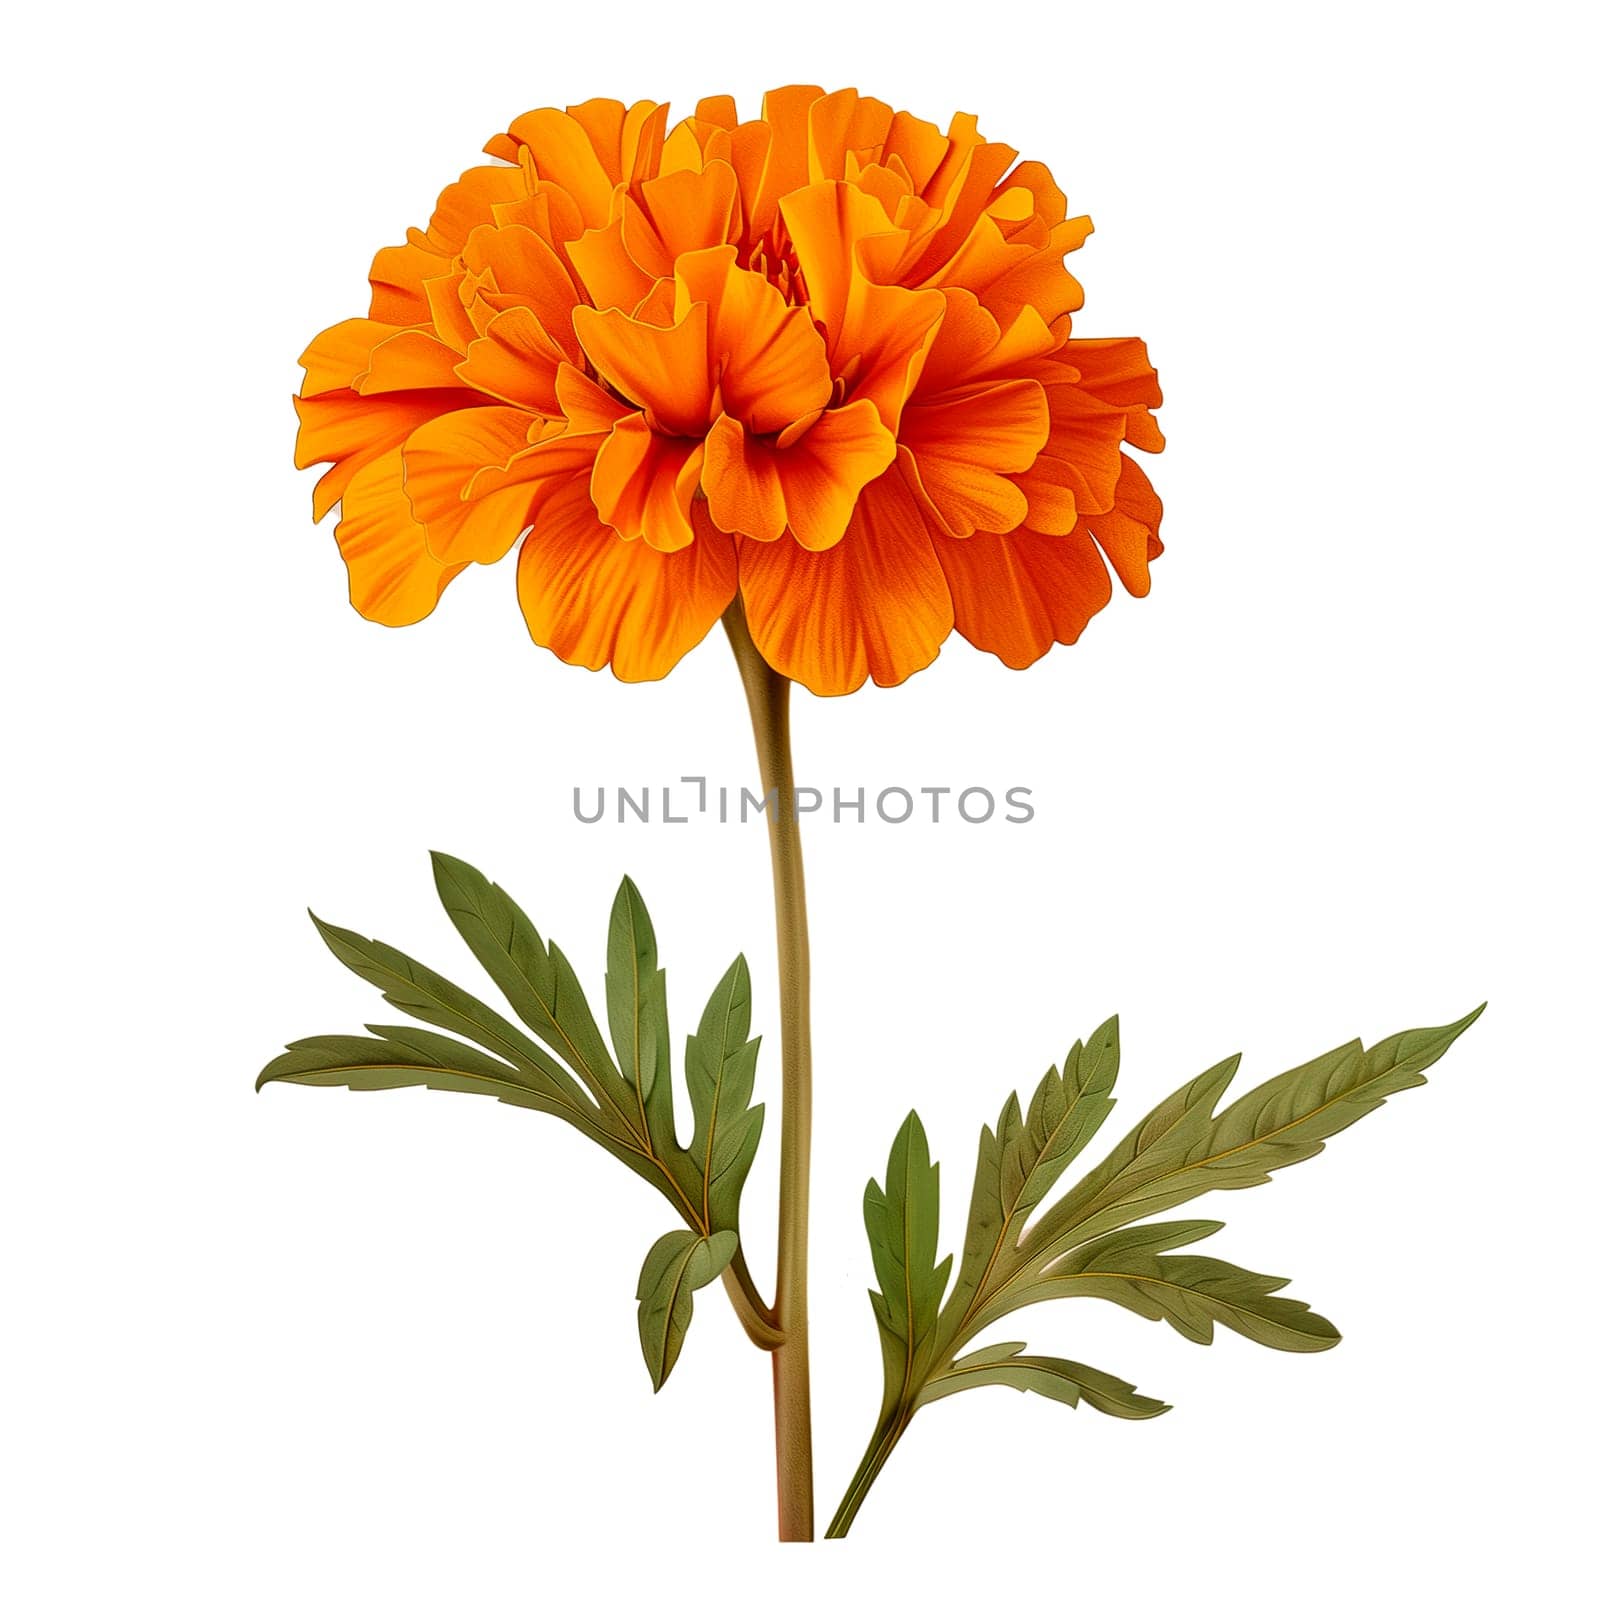 Isolated illustration of marigold flower by Dustick